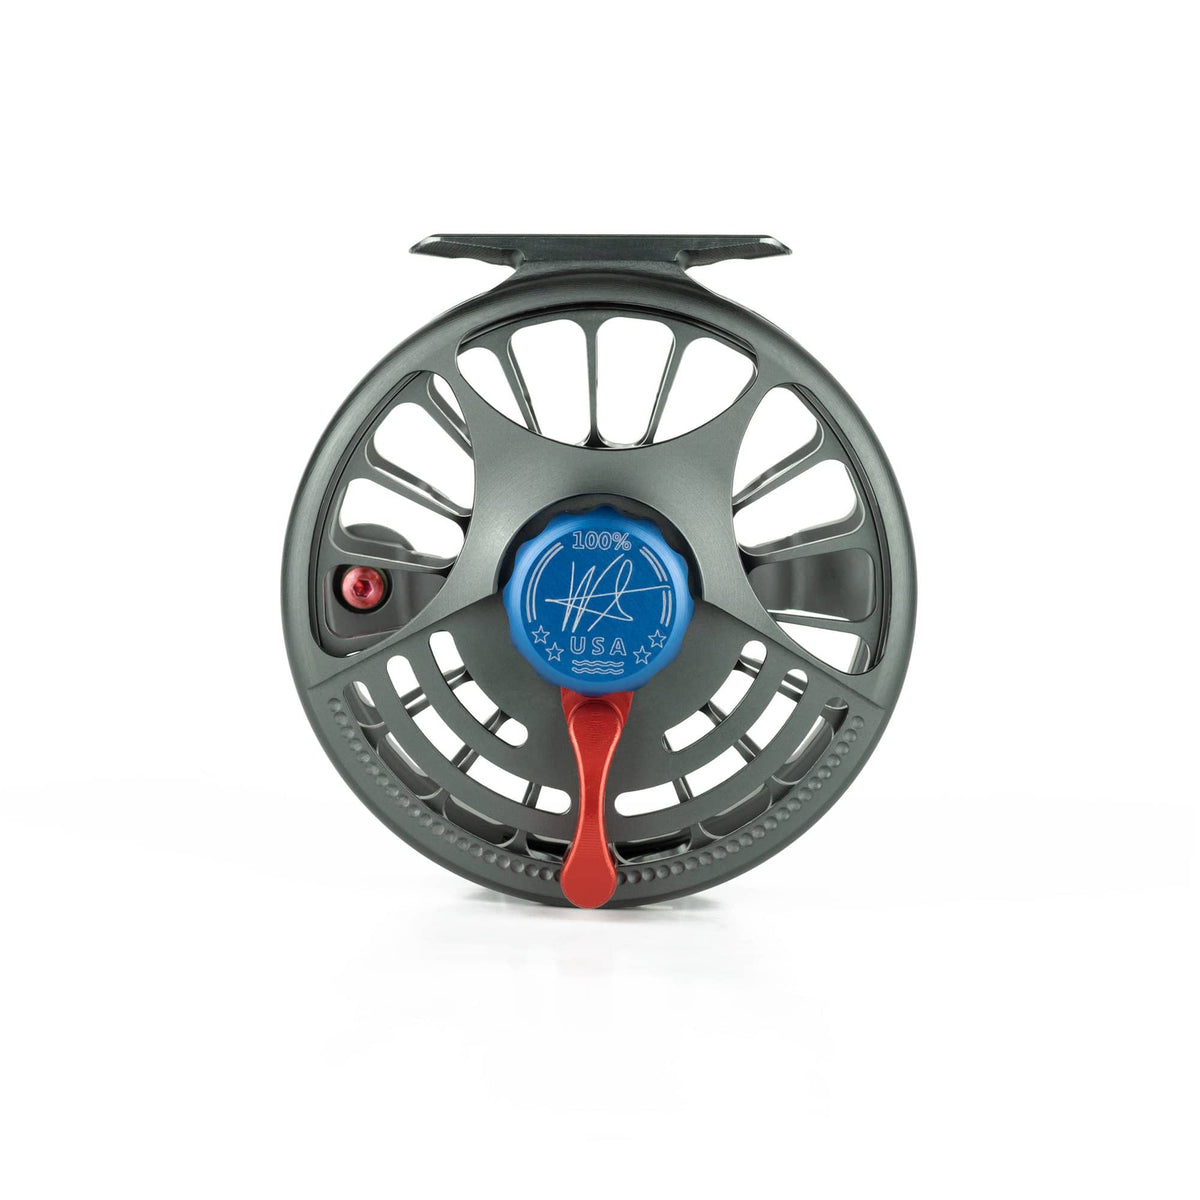 Seigler SF (Small Fly) Lever Drag Fly Reel Gunmetal with Red, Silver, &amp; Blue Accents